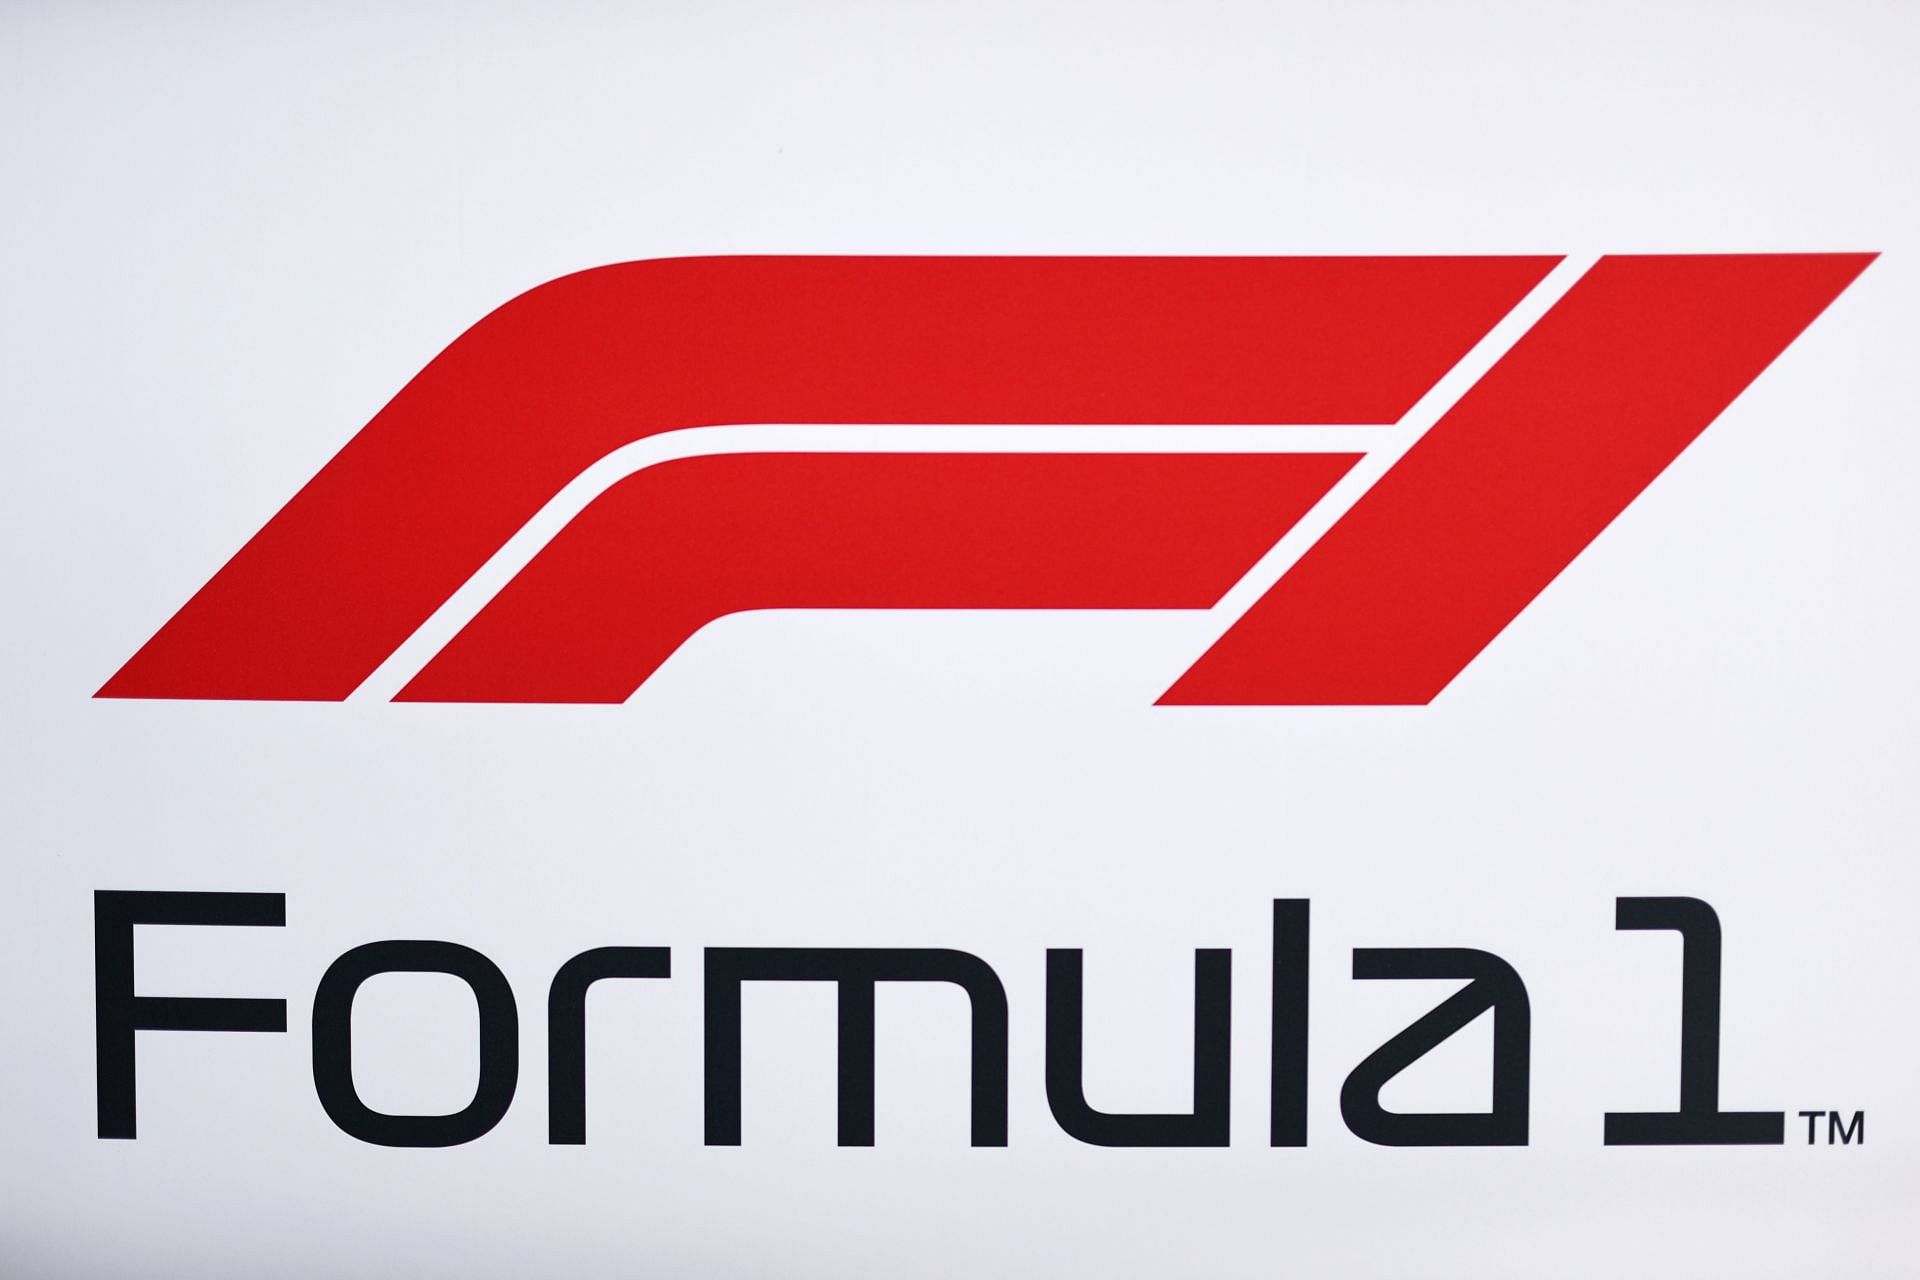 The Formula 1 logo in the Paddock in Austin, Texas (Photo by Chris Graythen/Getty Images)